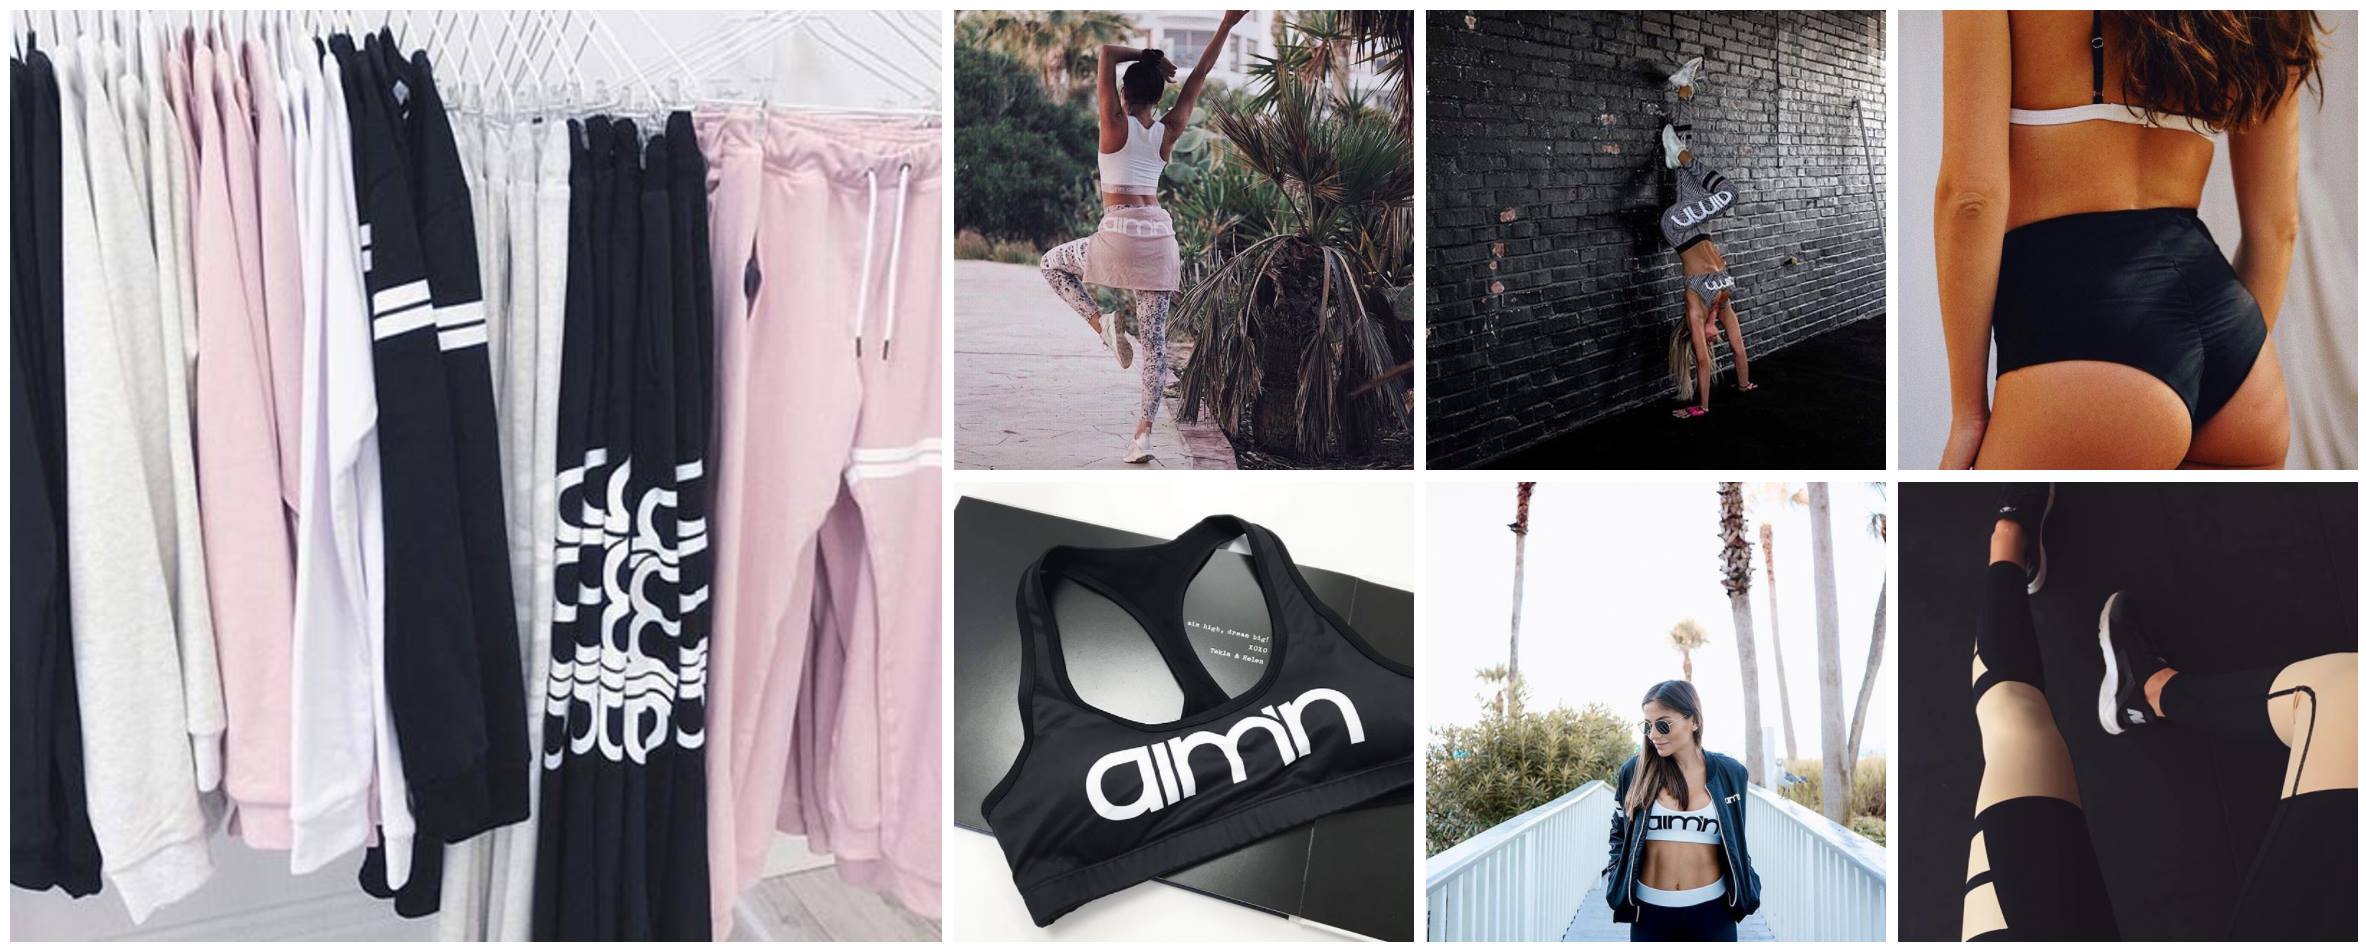 Get up to $40 OFF when you join Aim'N Dream Club